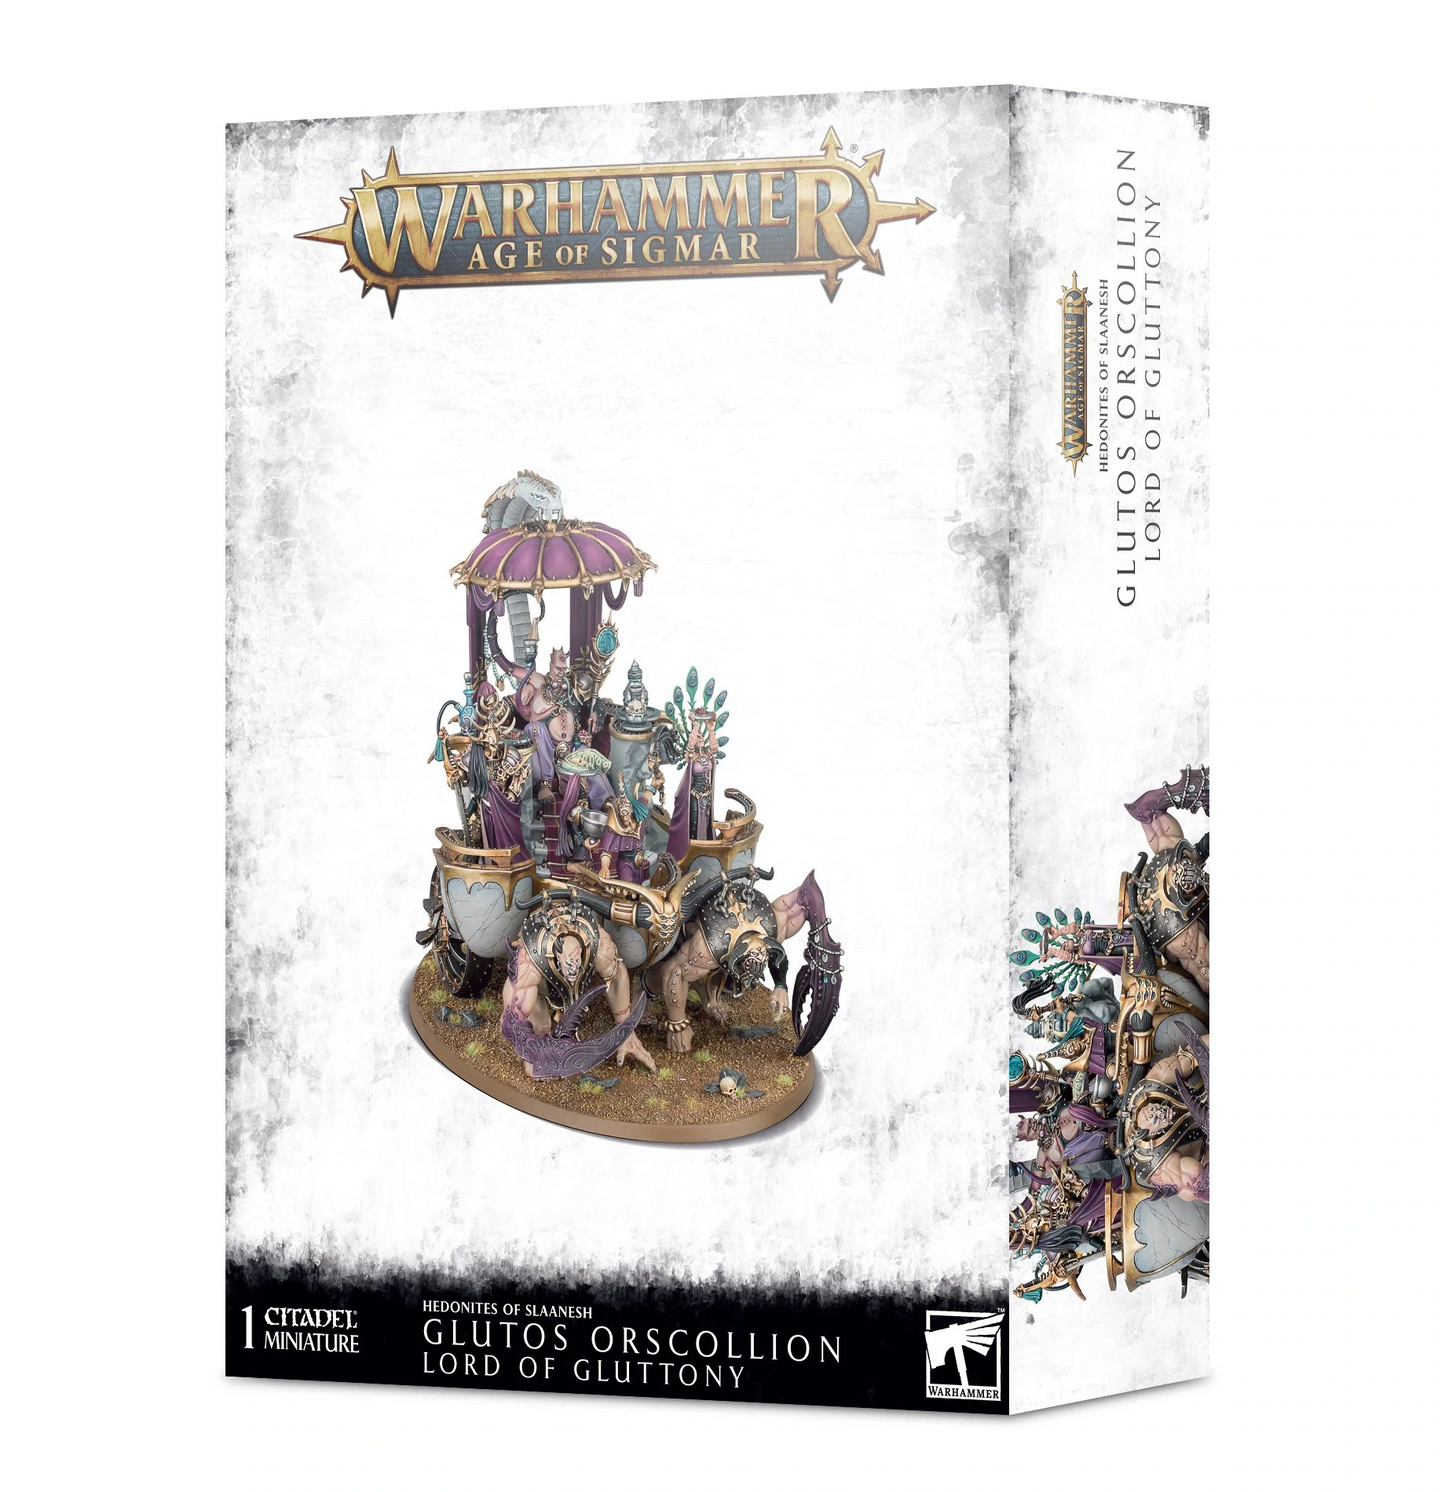 Glutos Orscollion Lord of Gluttony Hedonites of Slaanesh Games Workshop   